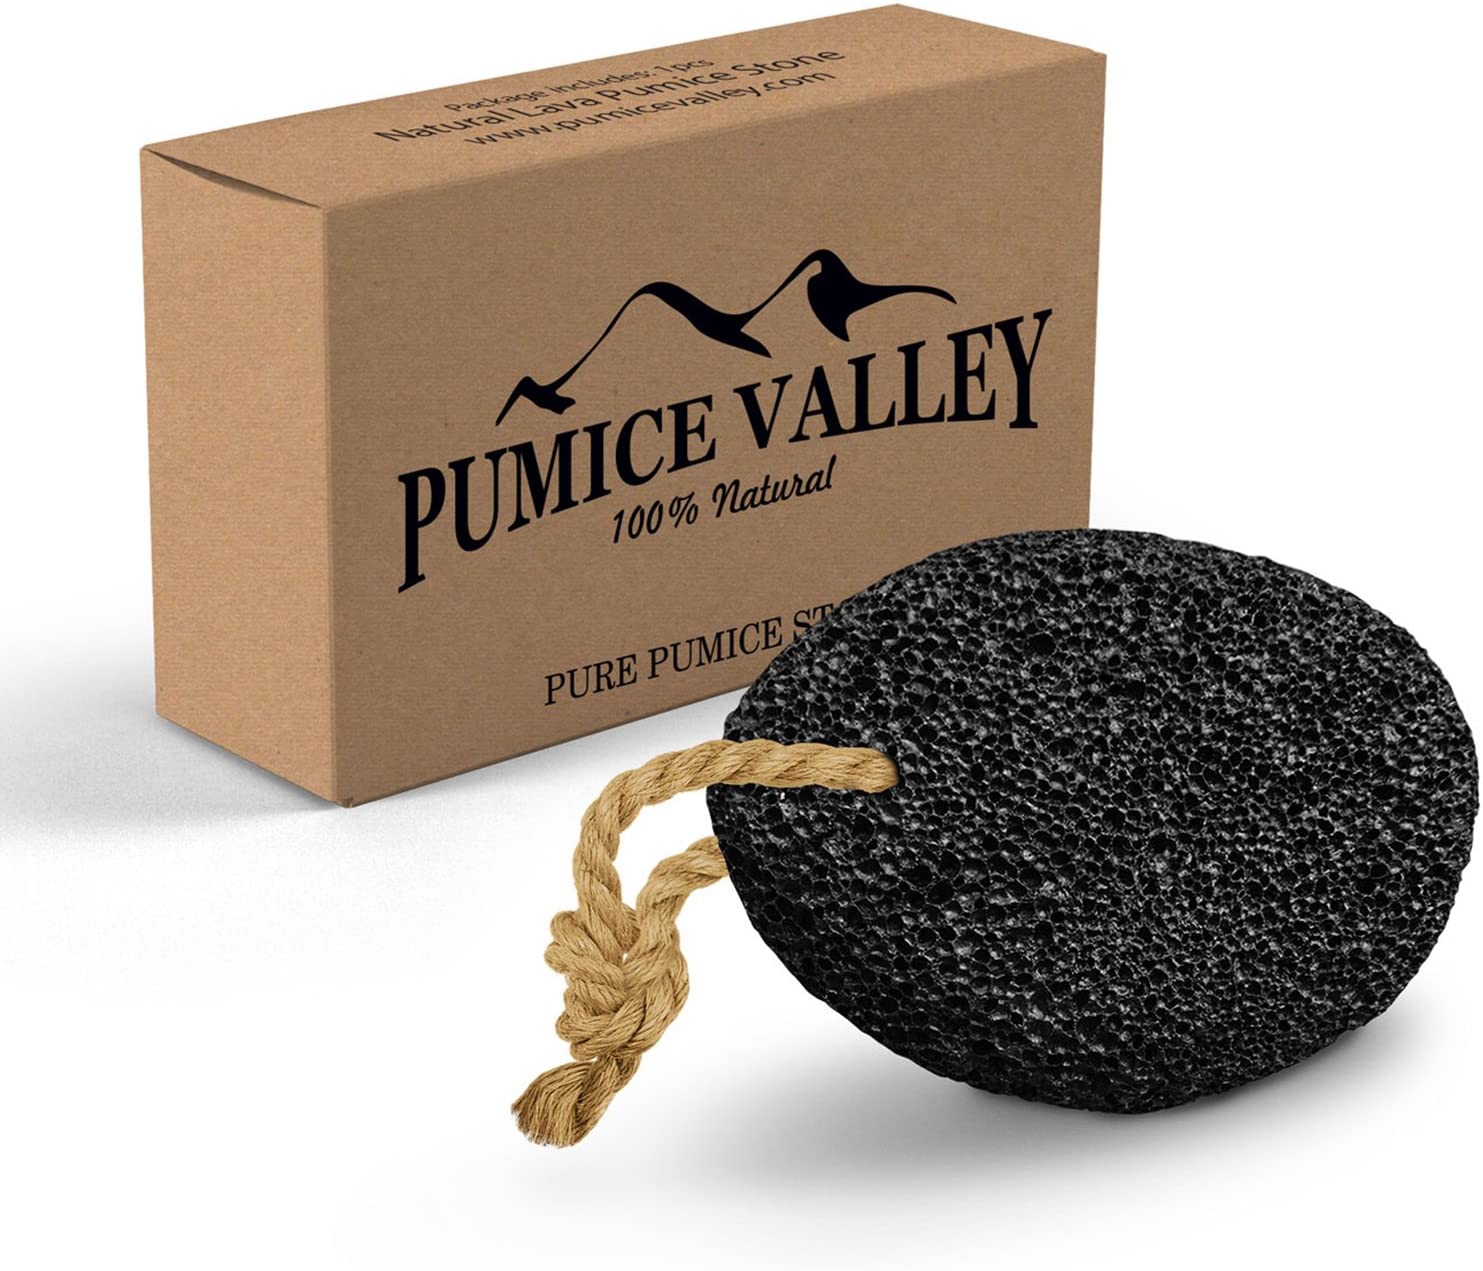 Pumice Valley Volcanic Rock Blood Flow Stimulating Foot Pumice